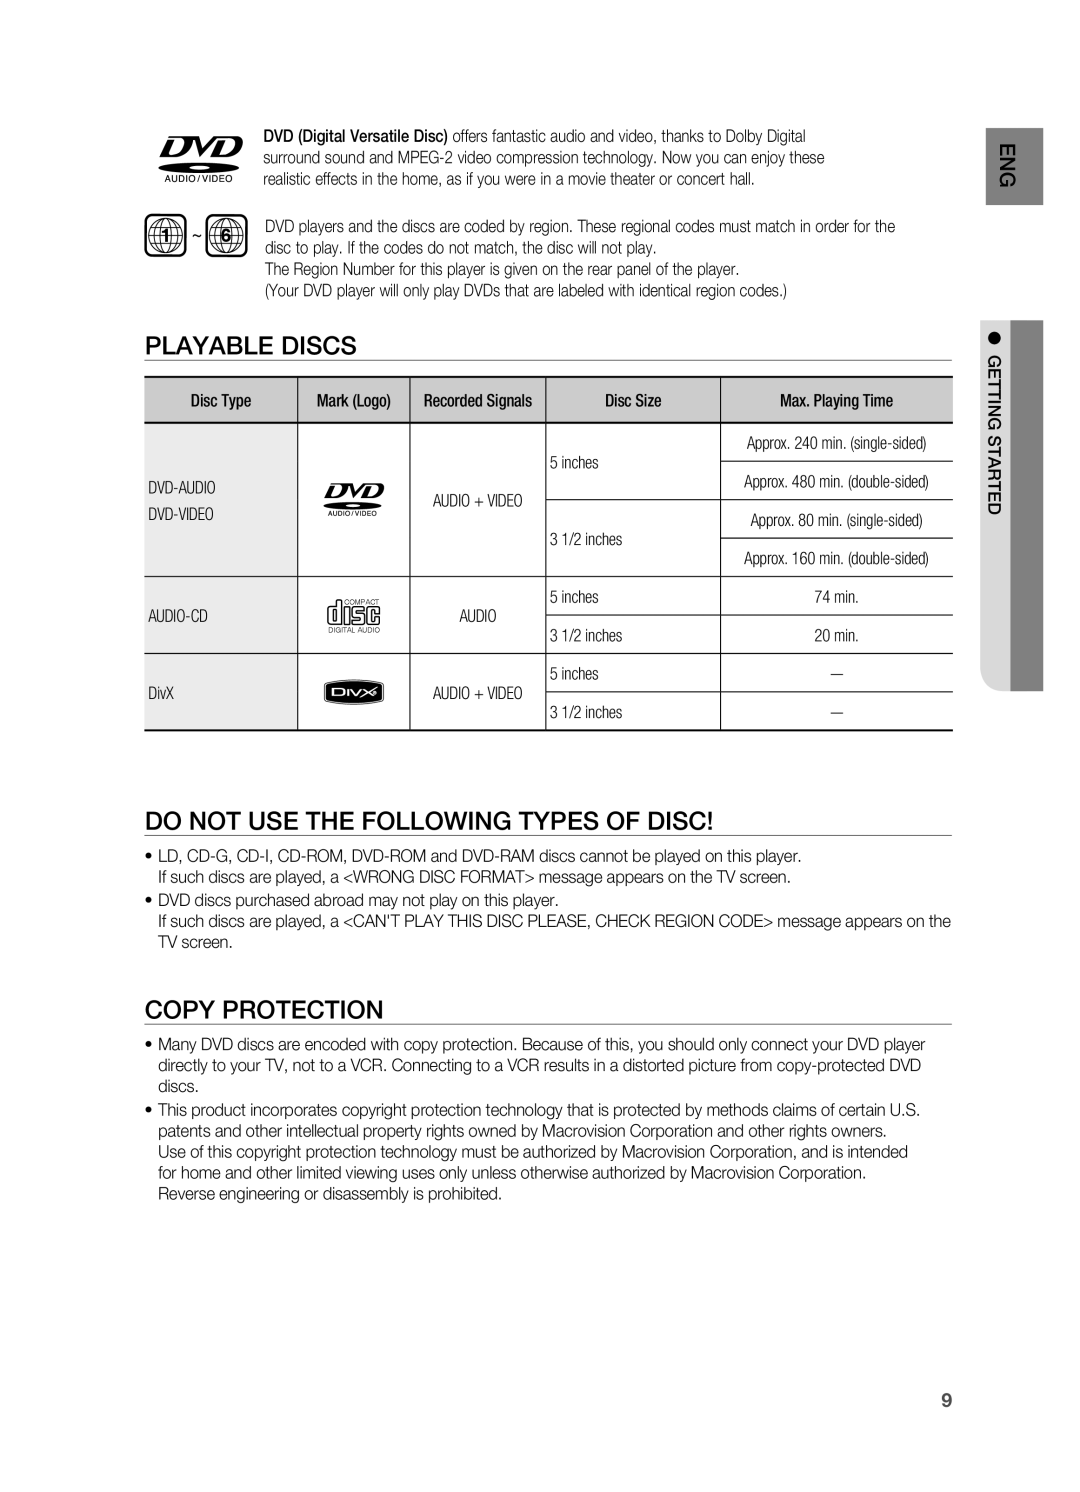 Samsung HT-Z510 manual Playable Discs, Do not use the following types of disc, Copy Protection 